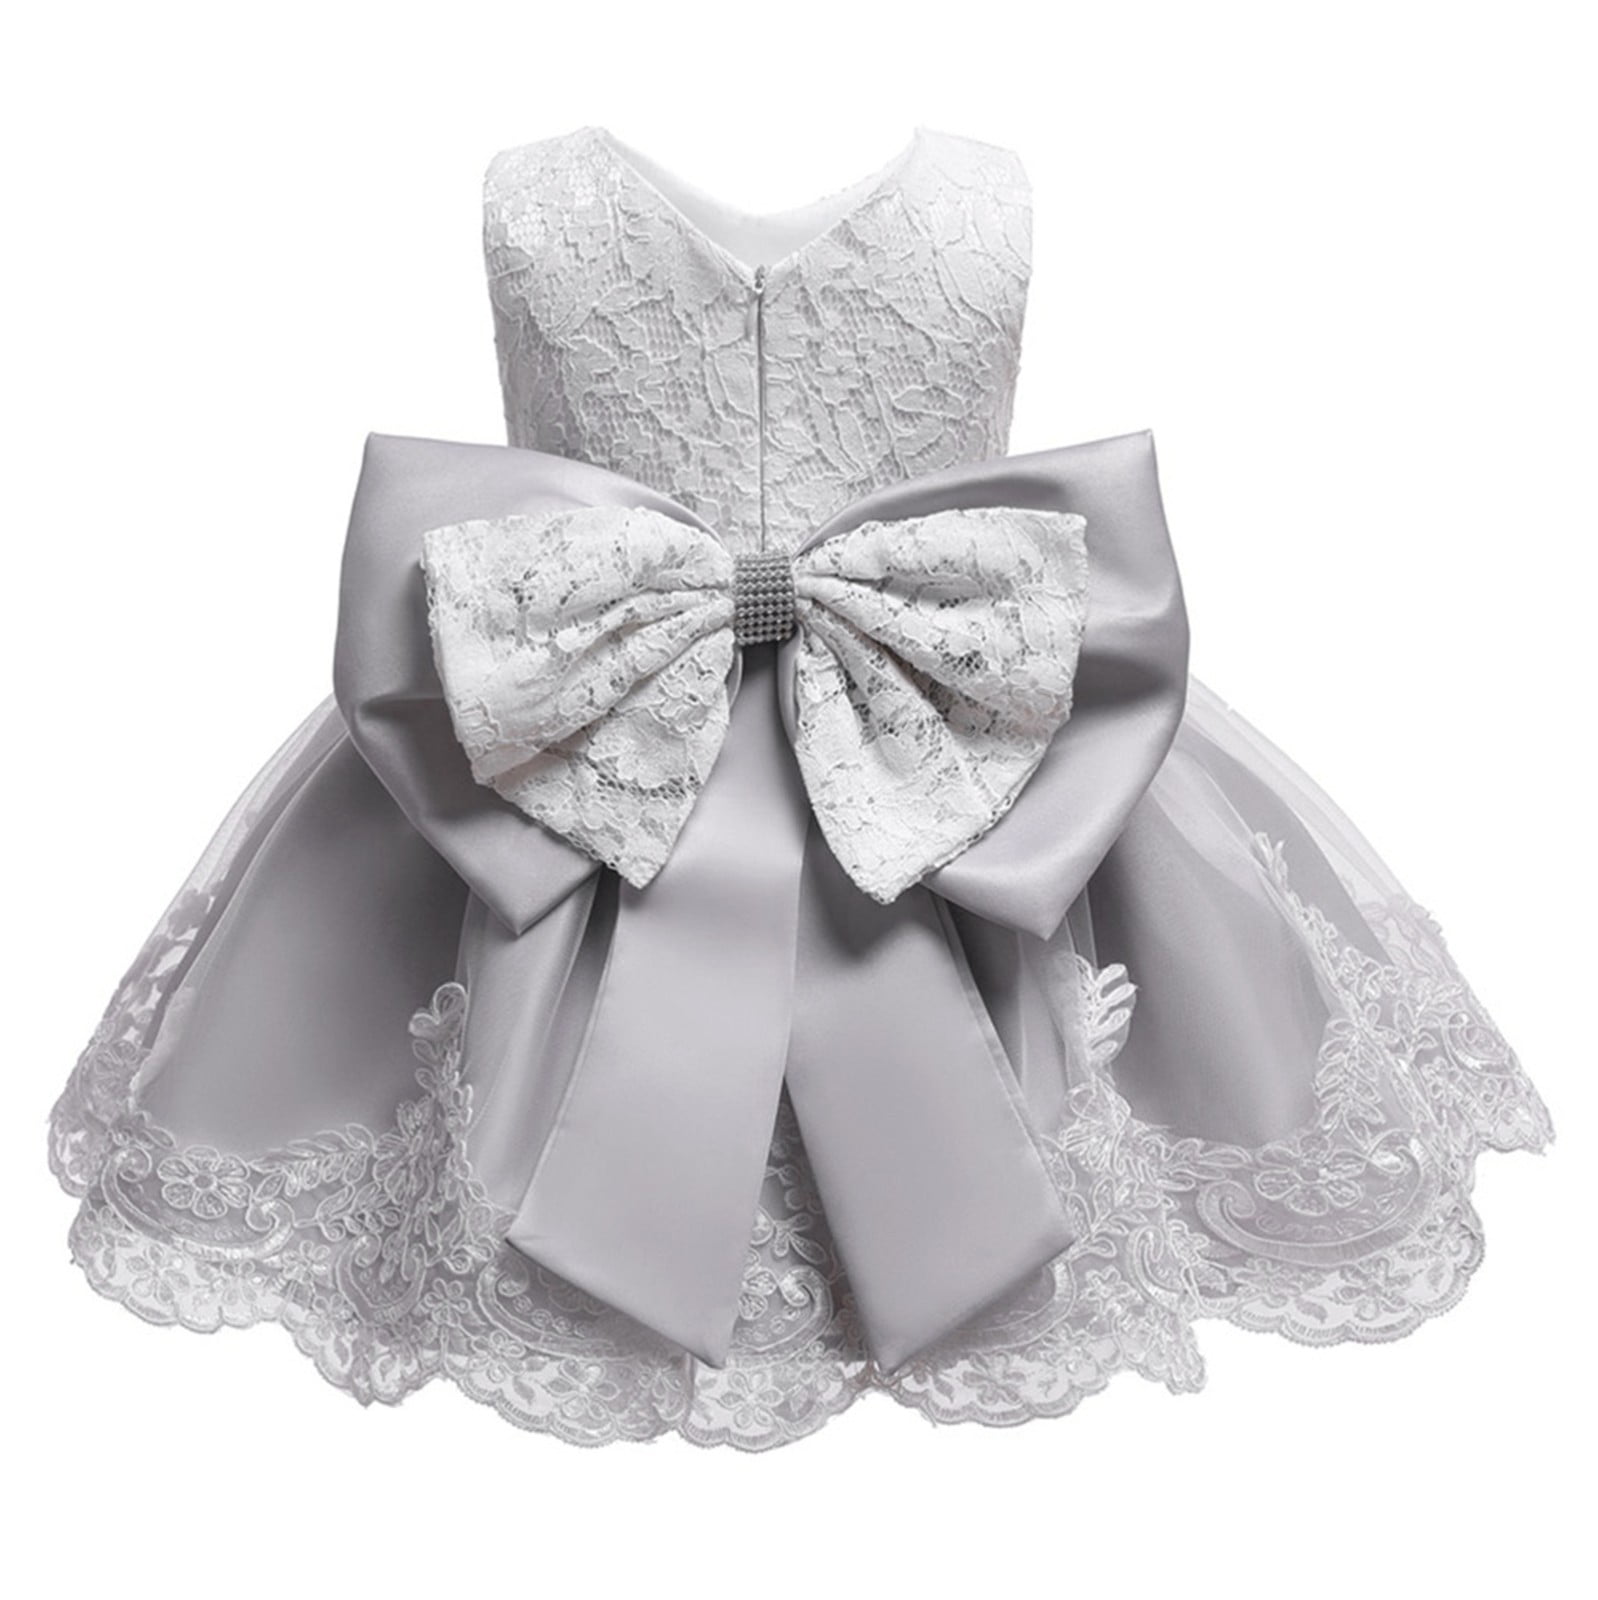 Details about   Baby Boys Christening Clothes White Infant Newborn Cotton Christening Handmade 